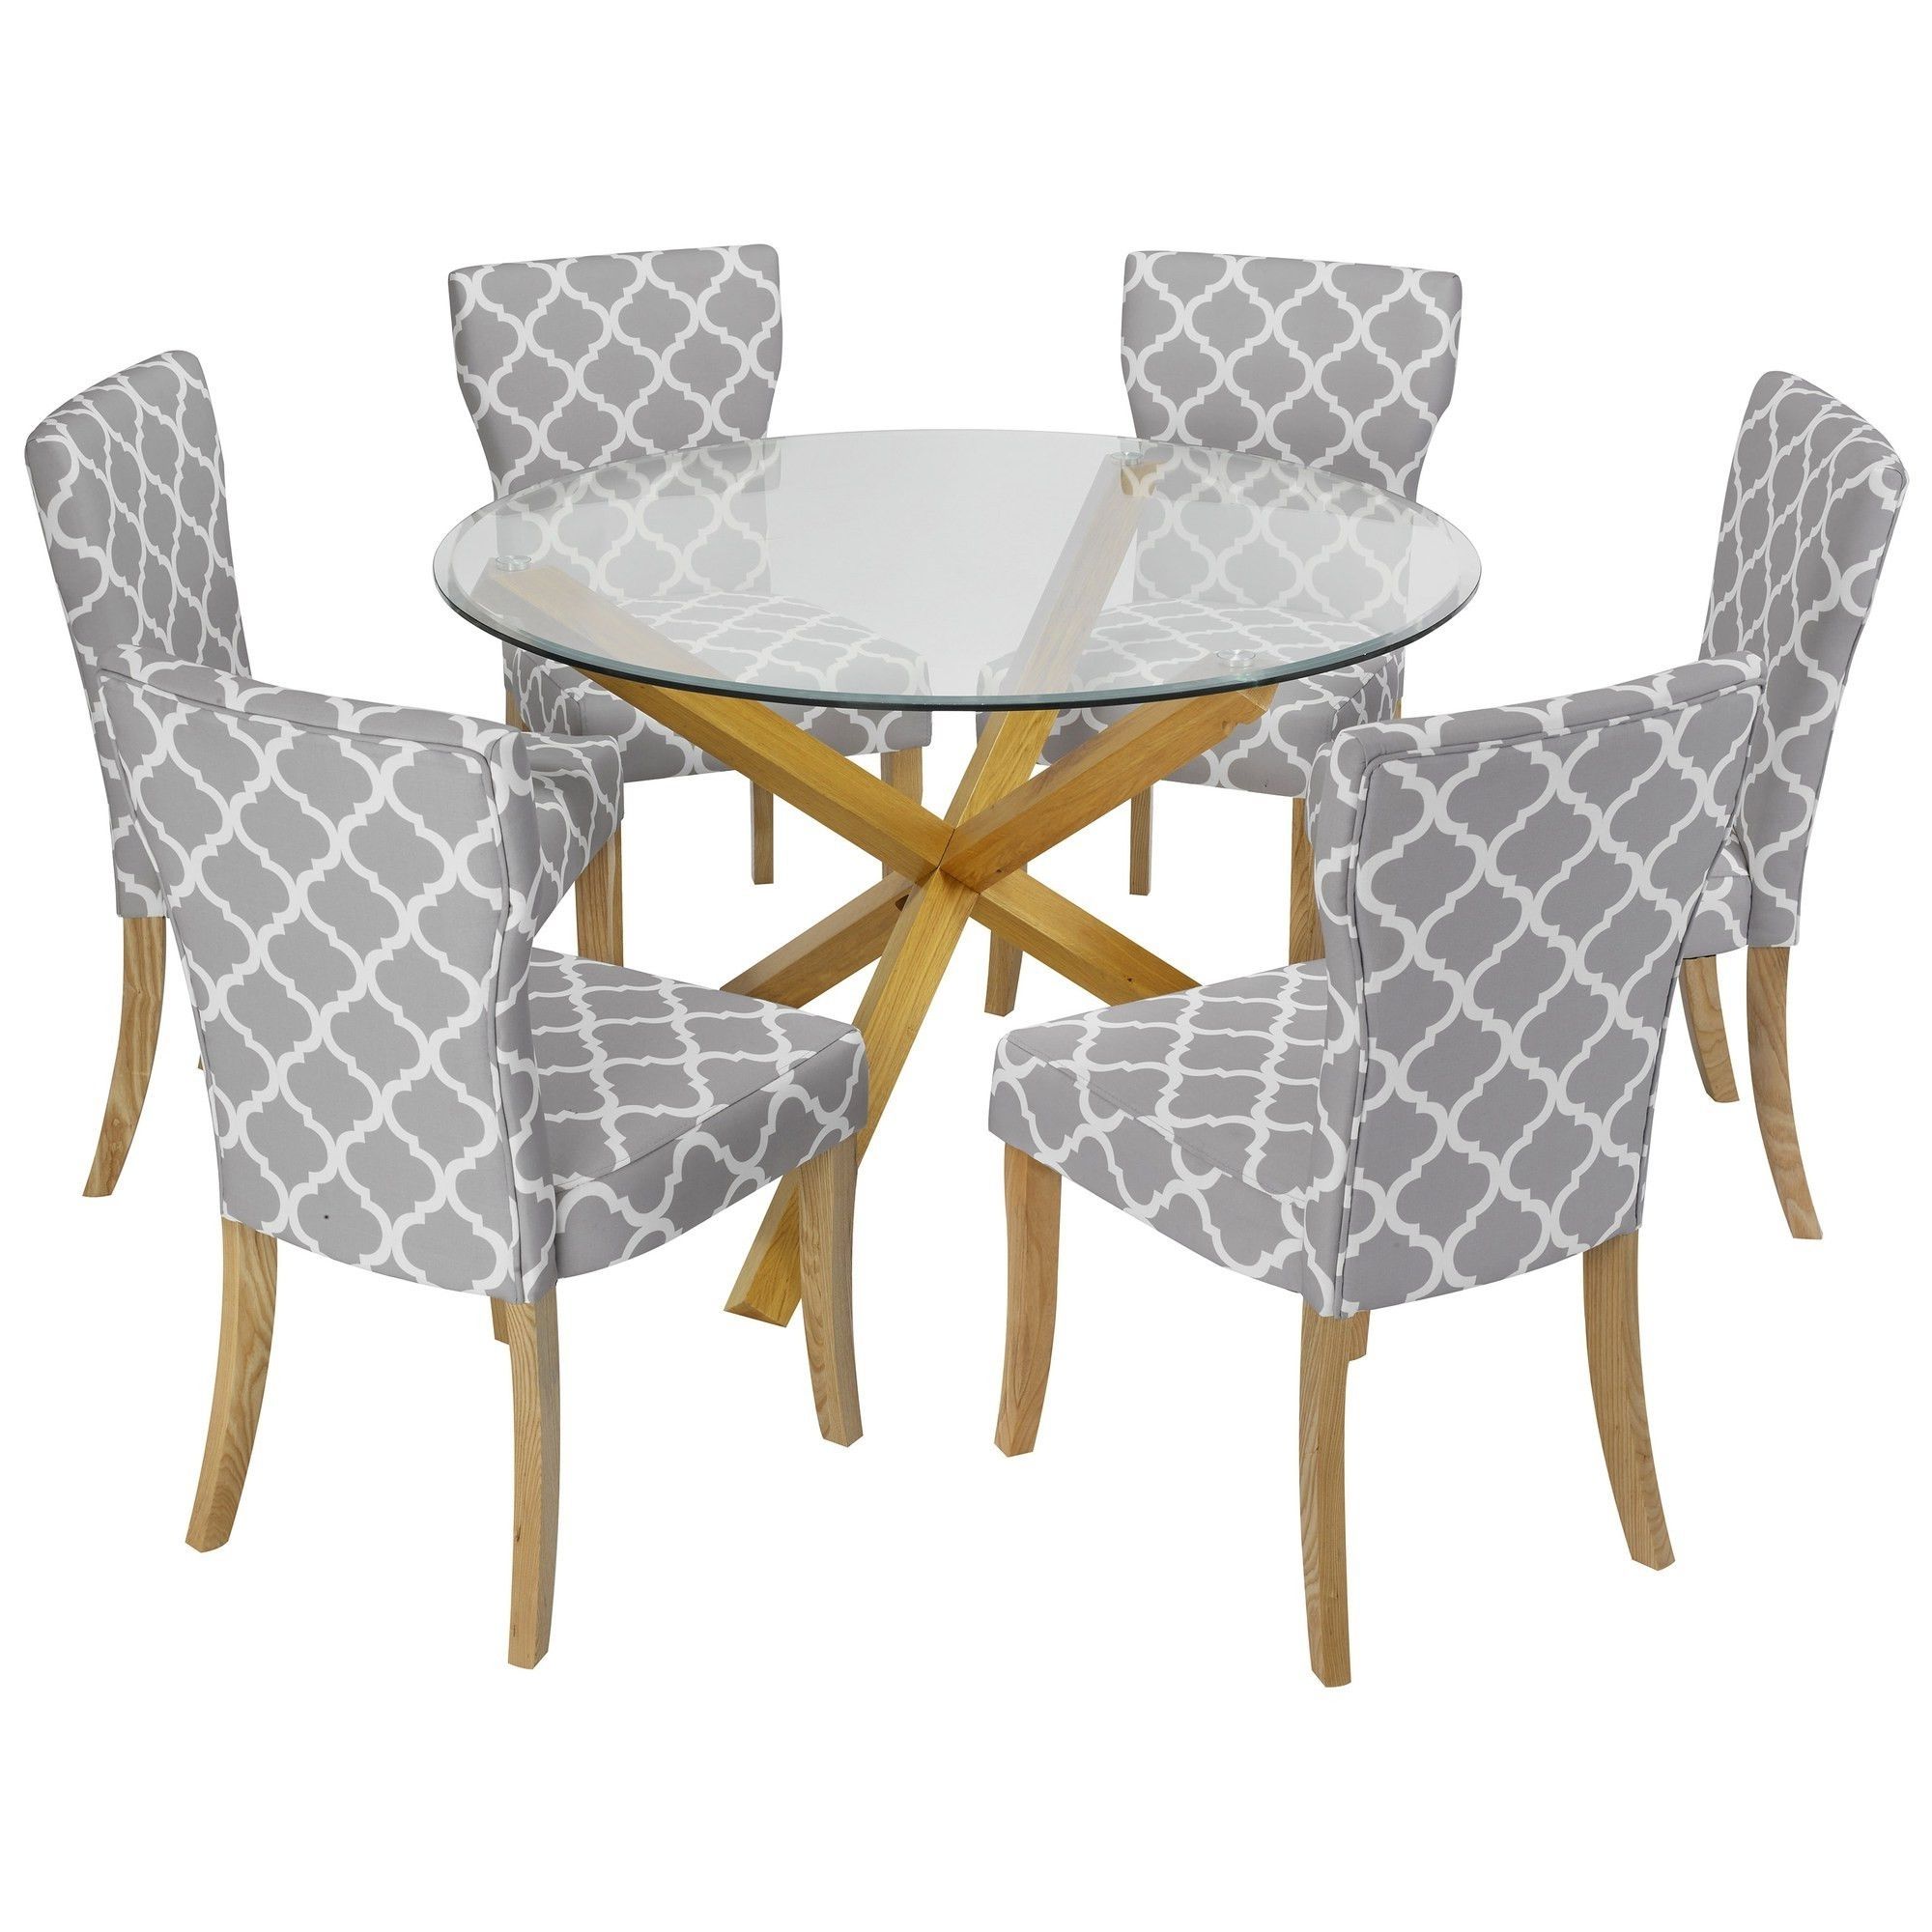 Newest Solid Oak & Glass Round Dining Table And Chair Set With 6 Grey Throughout Round Glass Dining Tables With Oak Legs (View 24 of 25)